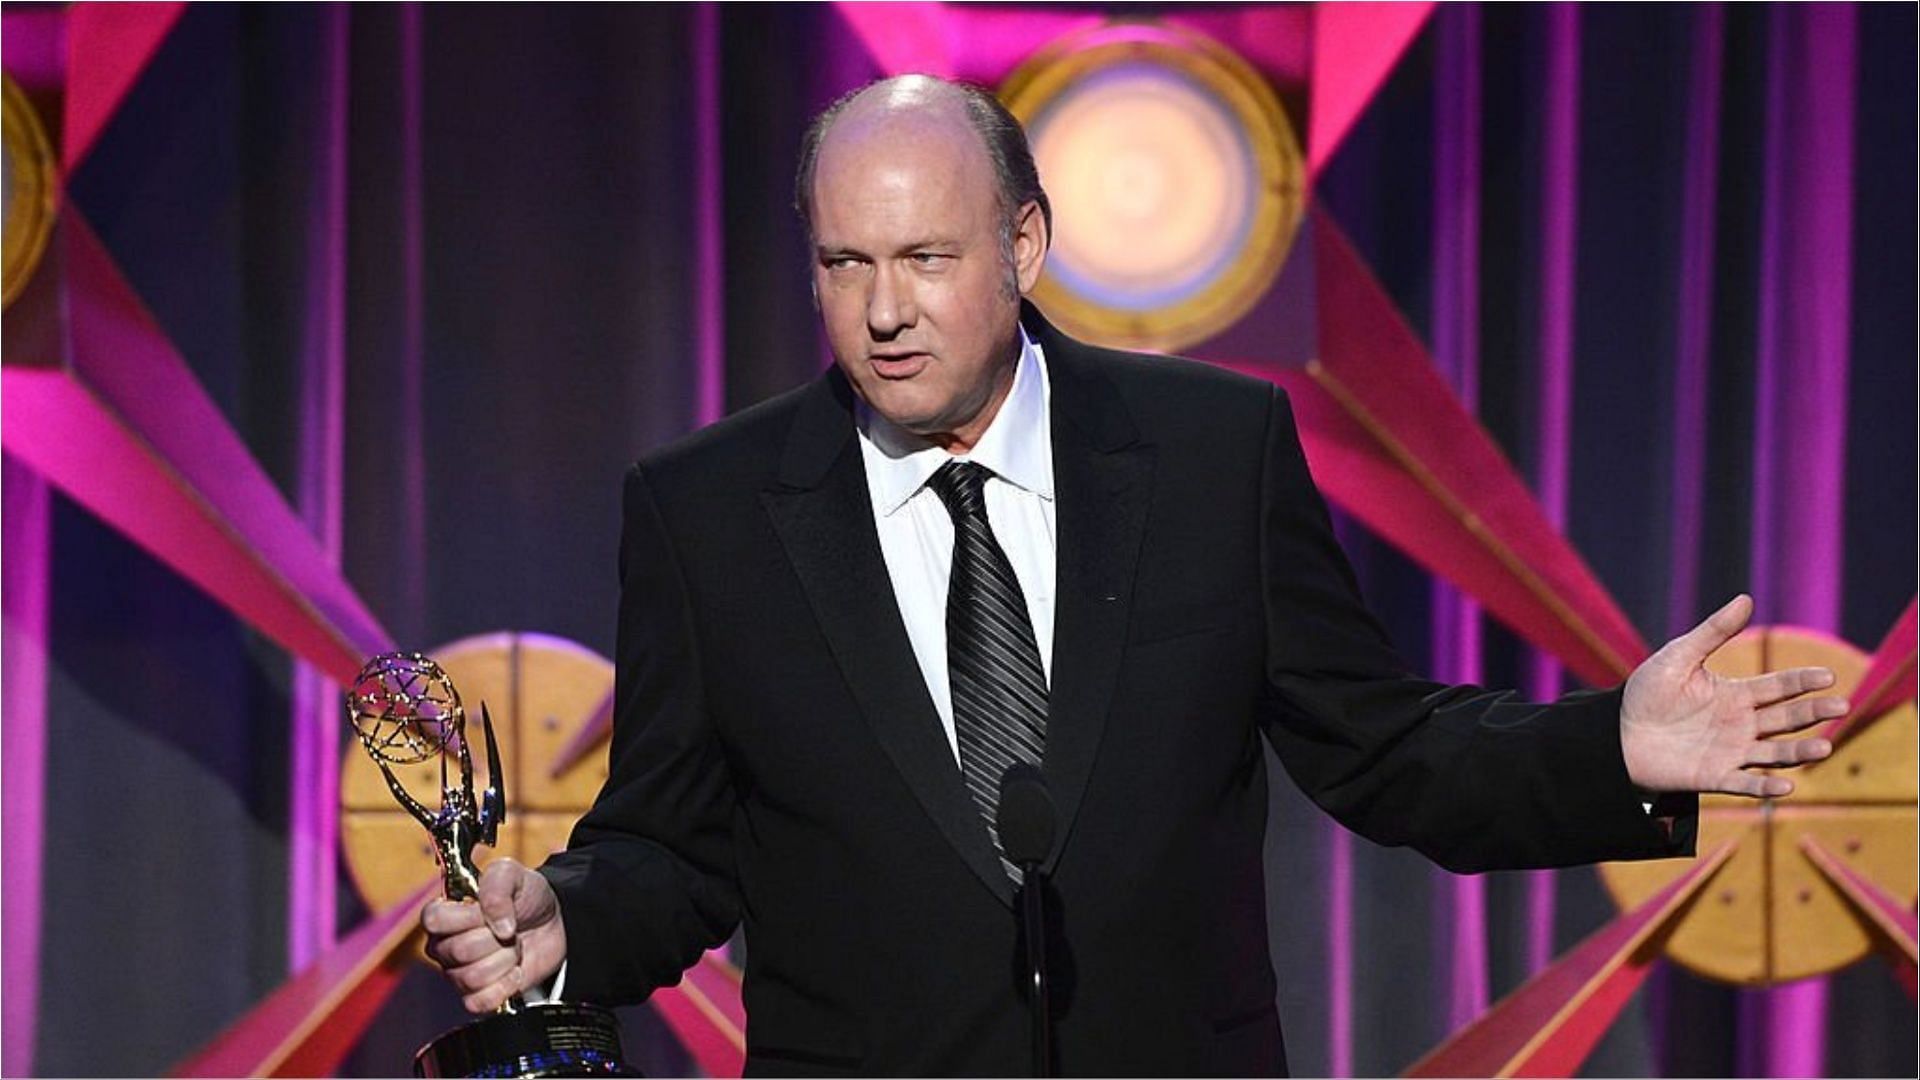 Bill Geddie recently died at the age of 68 (Image via Michael Buckner/Getty Images)